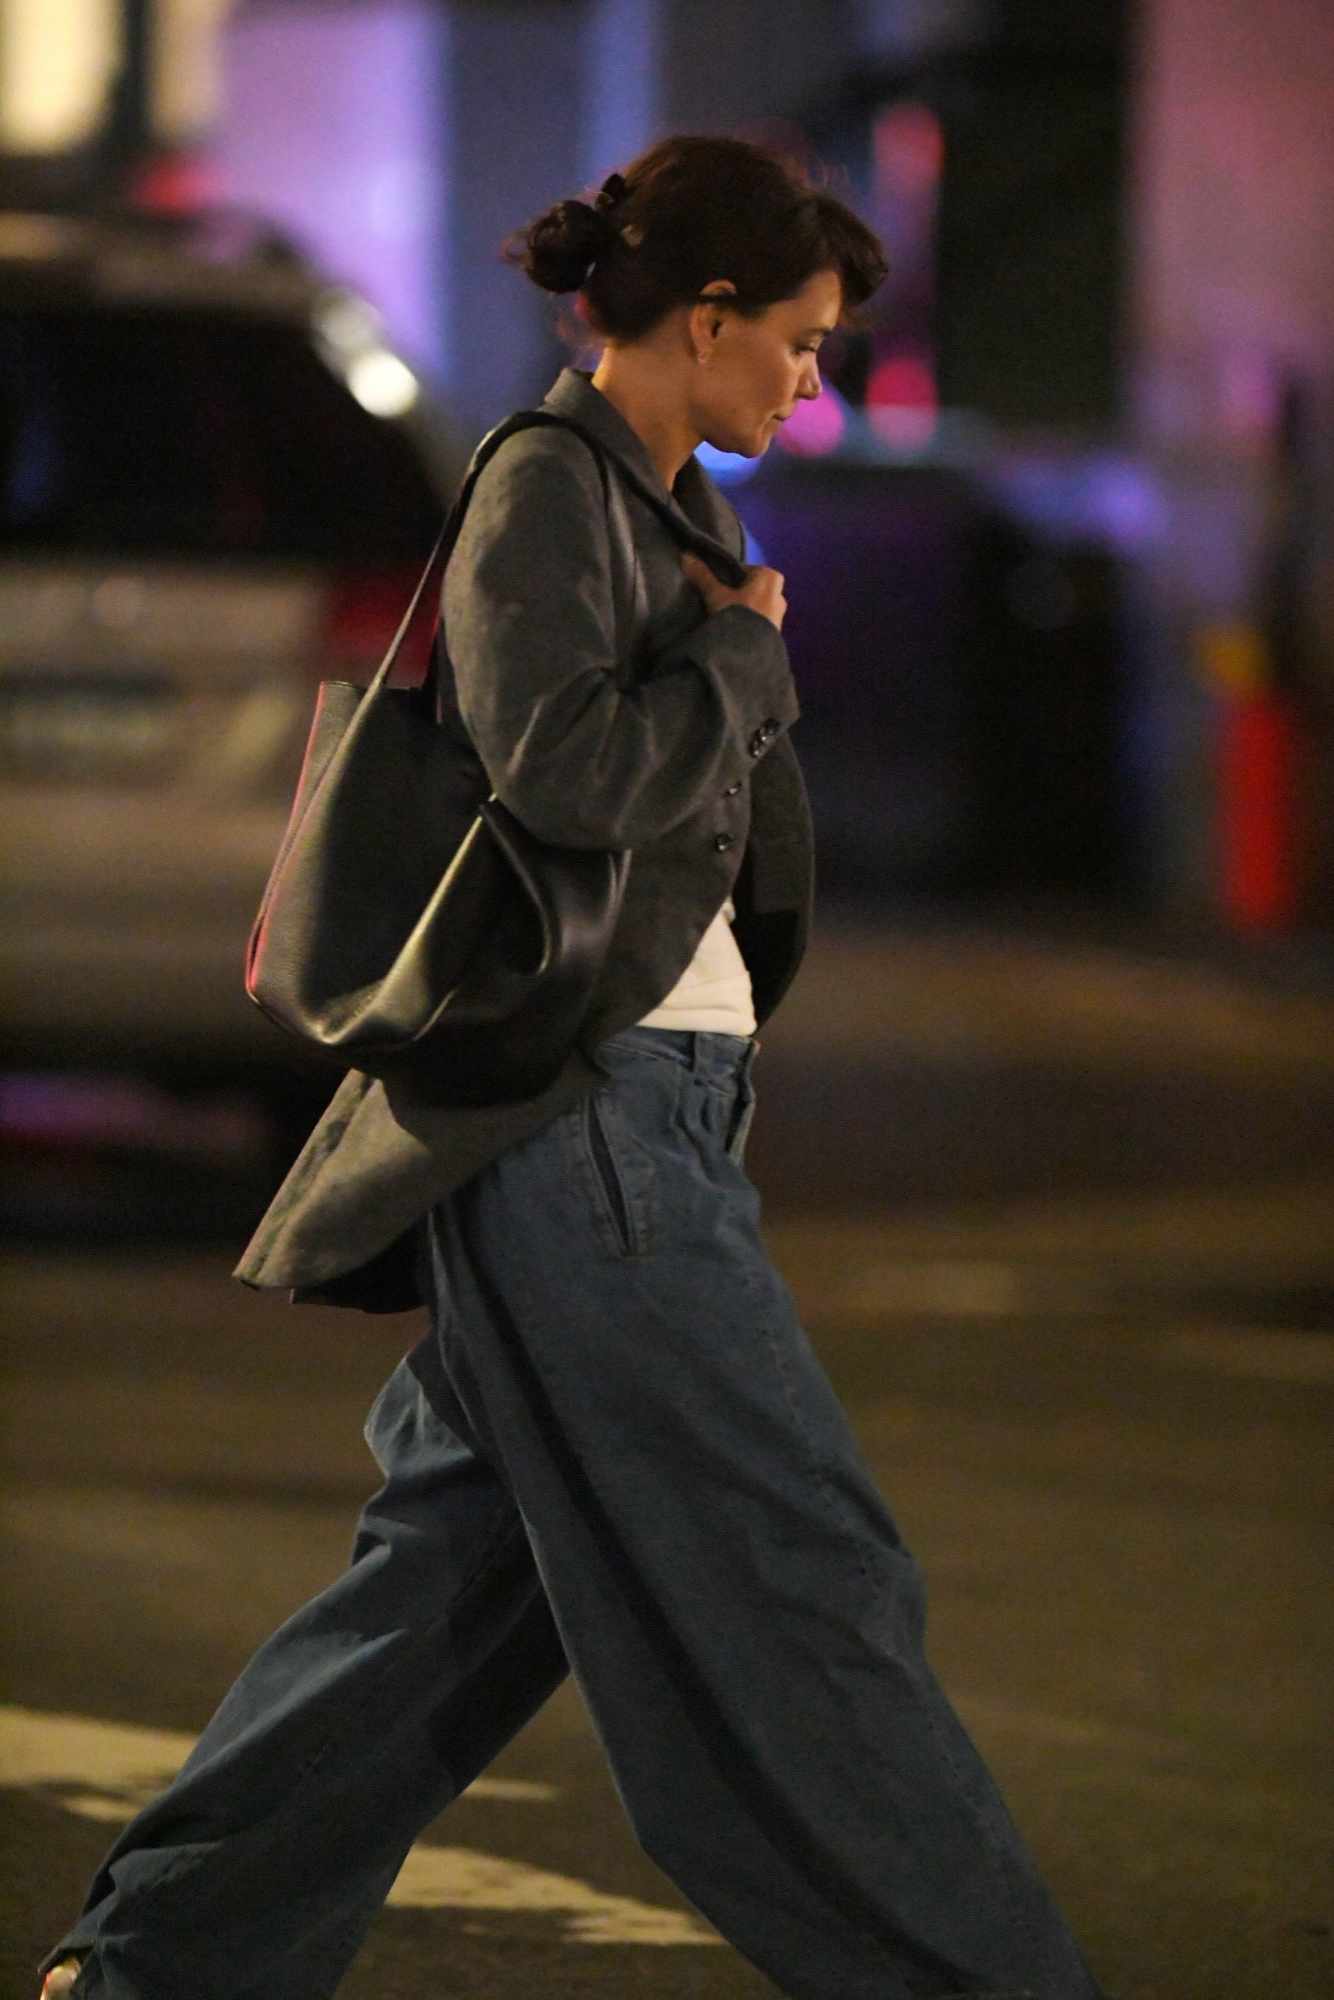 Katie Holmes seen in New York wearing a grey jacket, wide blue jeans, and a brown leather bag